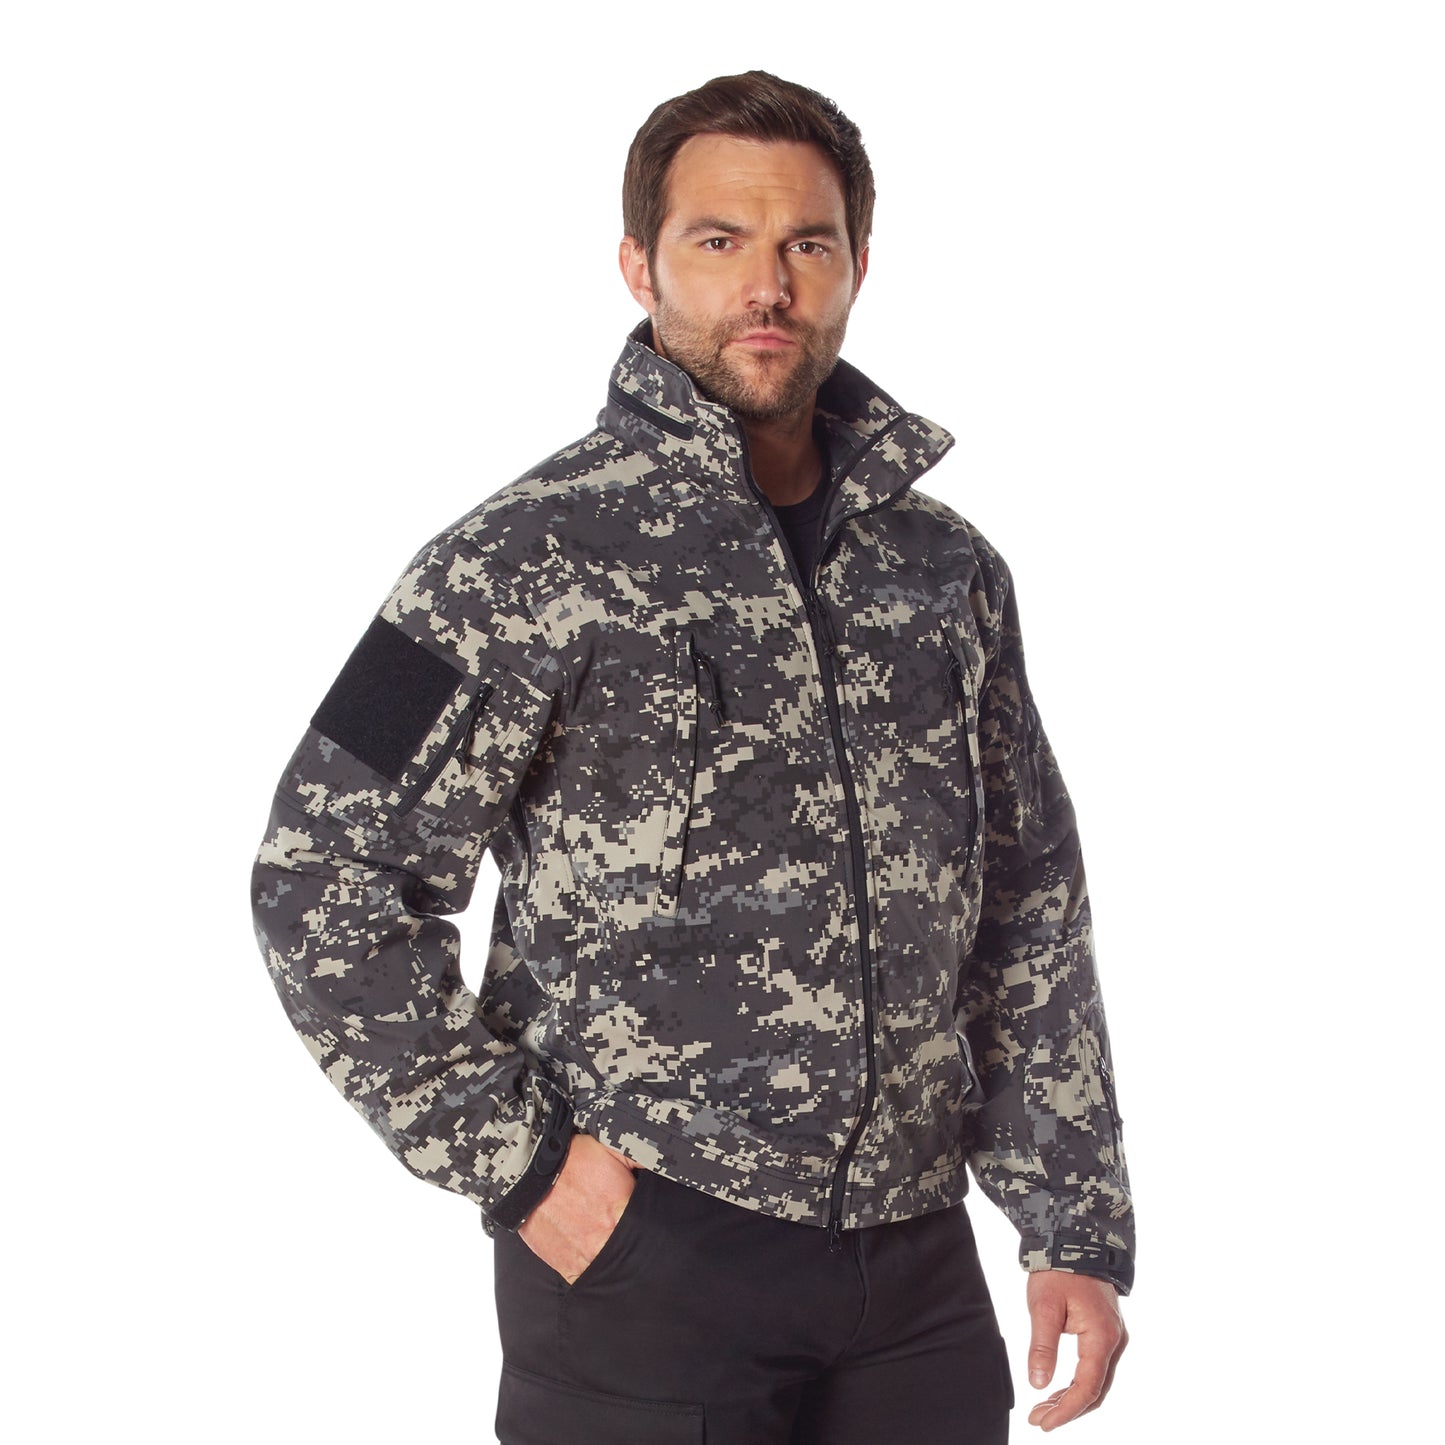 Special Ops Soft Shell Jacket